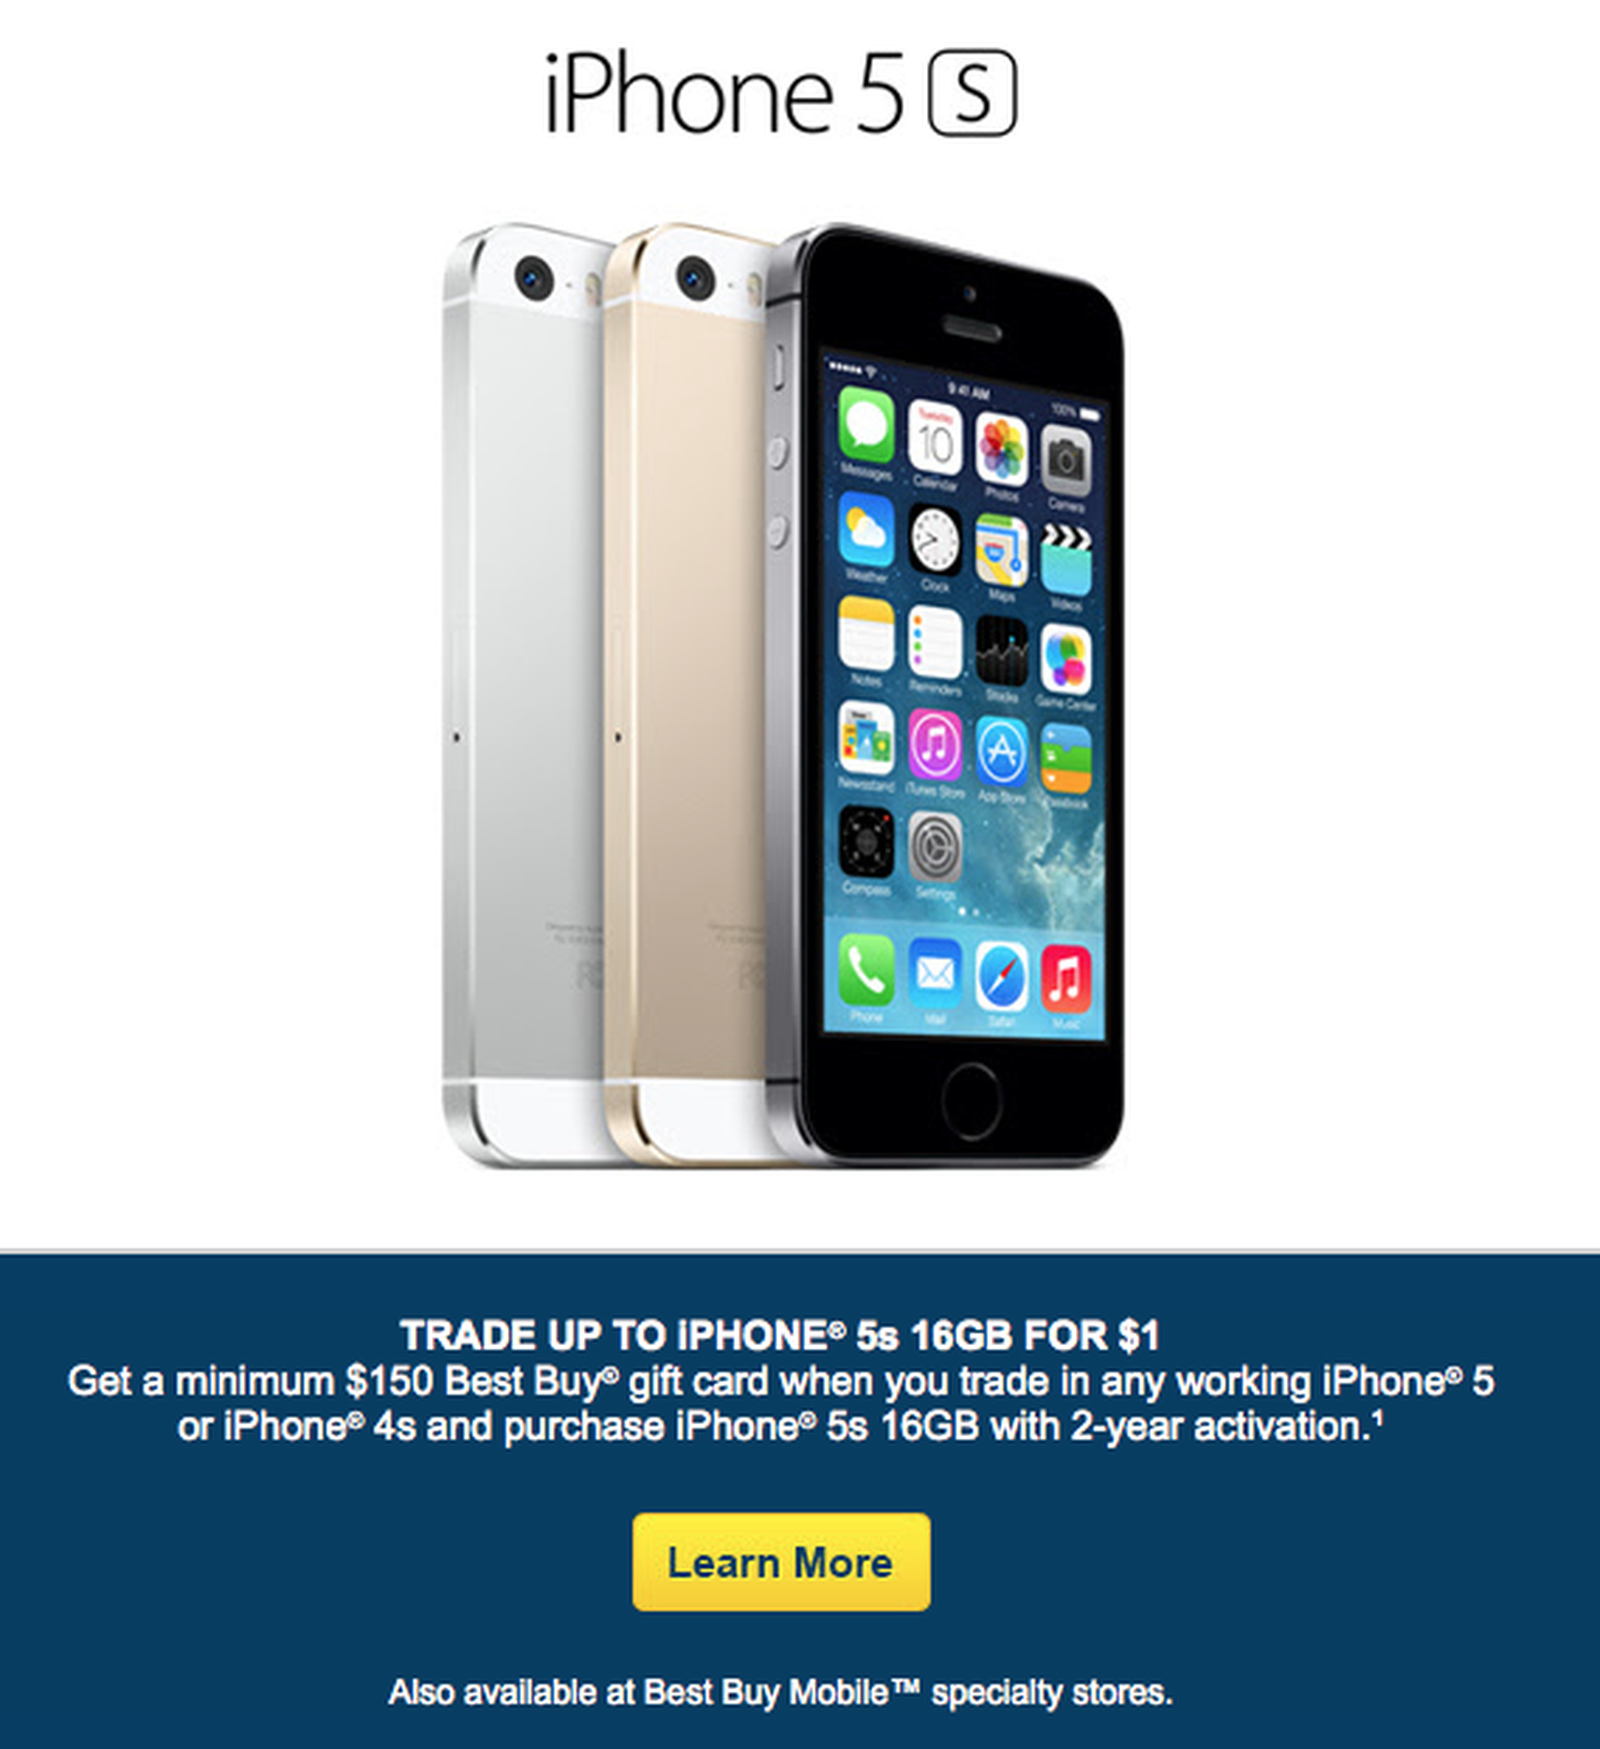 Best Buy Offering Free 16GB iPhone 5s With Trade-In of iPhone 4s